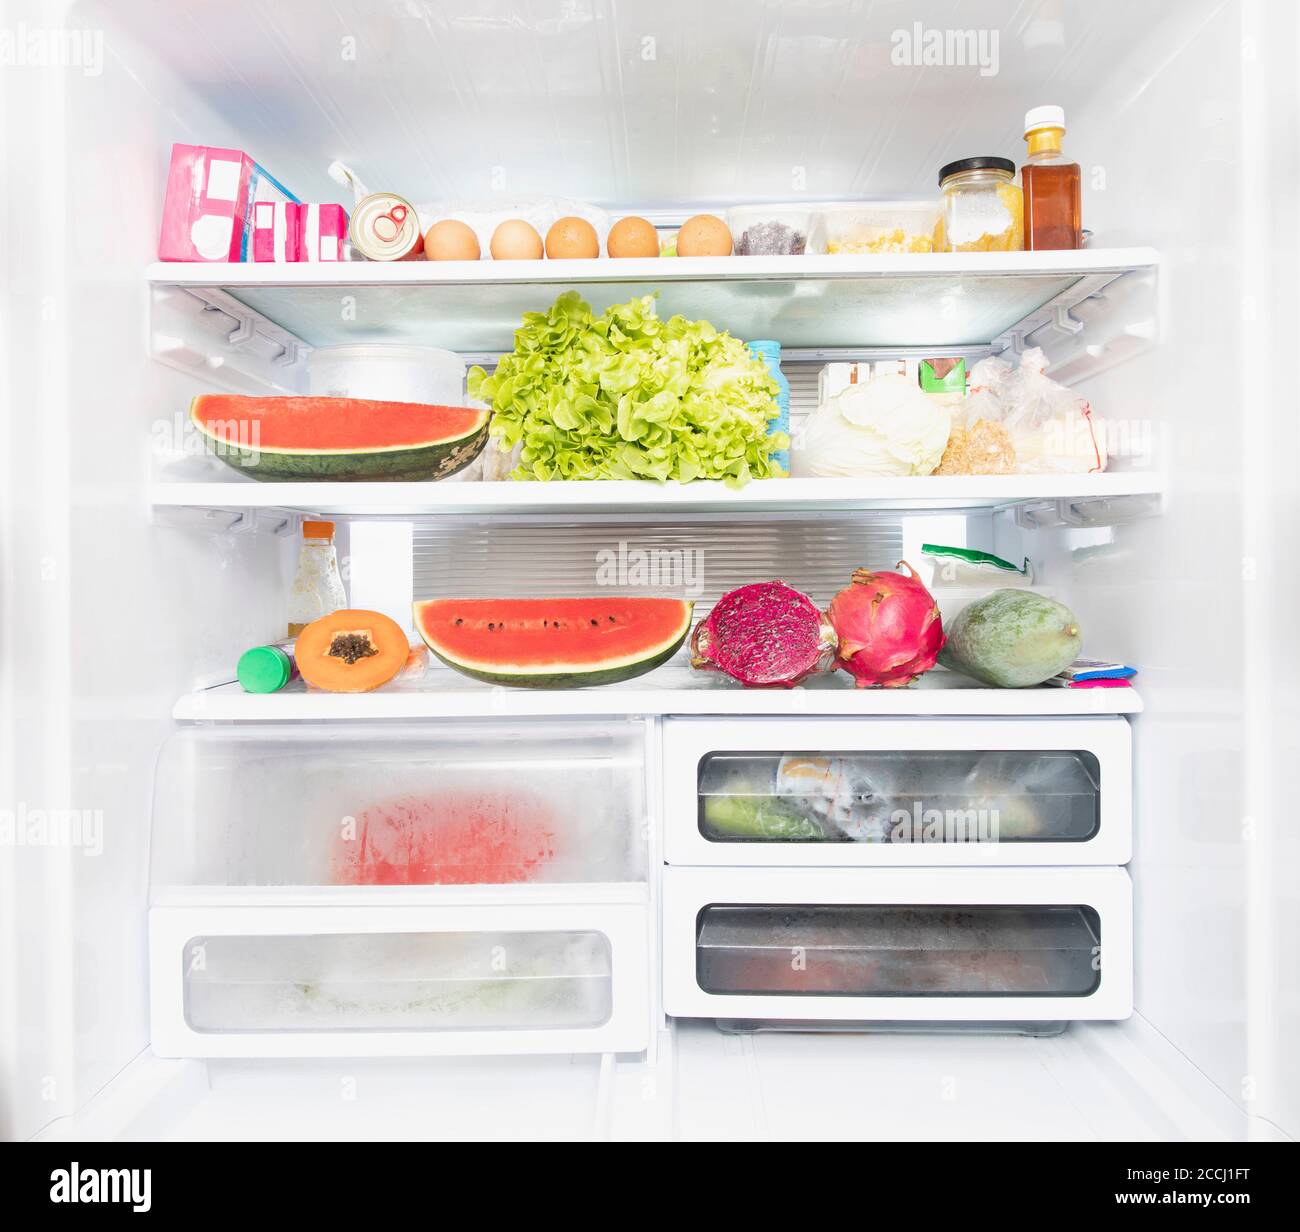 Open refrigerator full of products inside Stock Photo